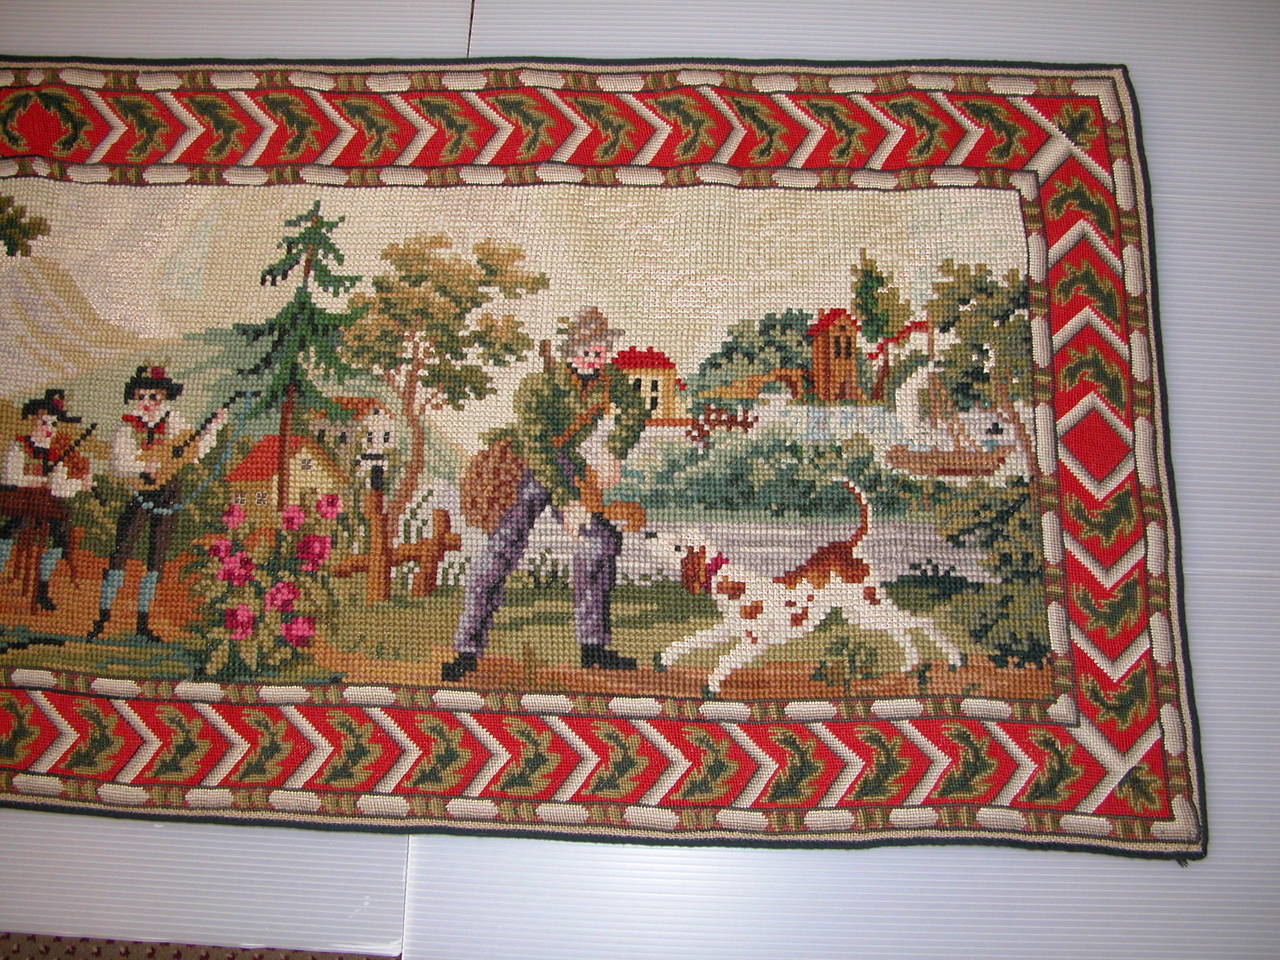 Unknown Early 20th Century Needlepoint Runner Depicting Austrian Figures